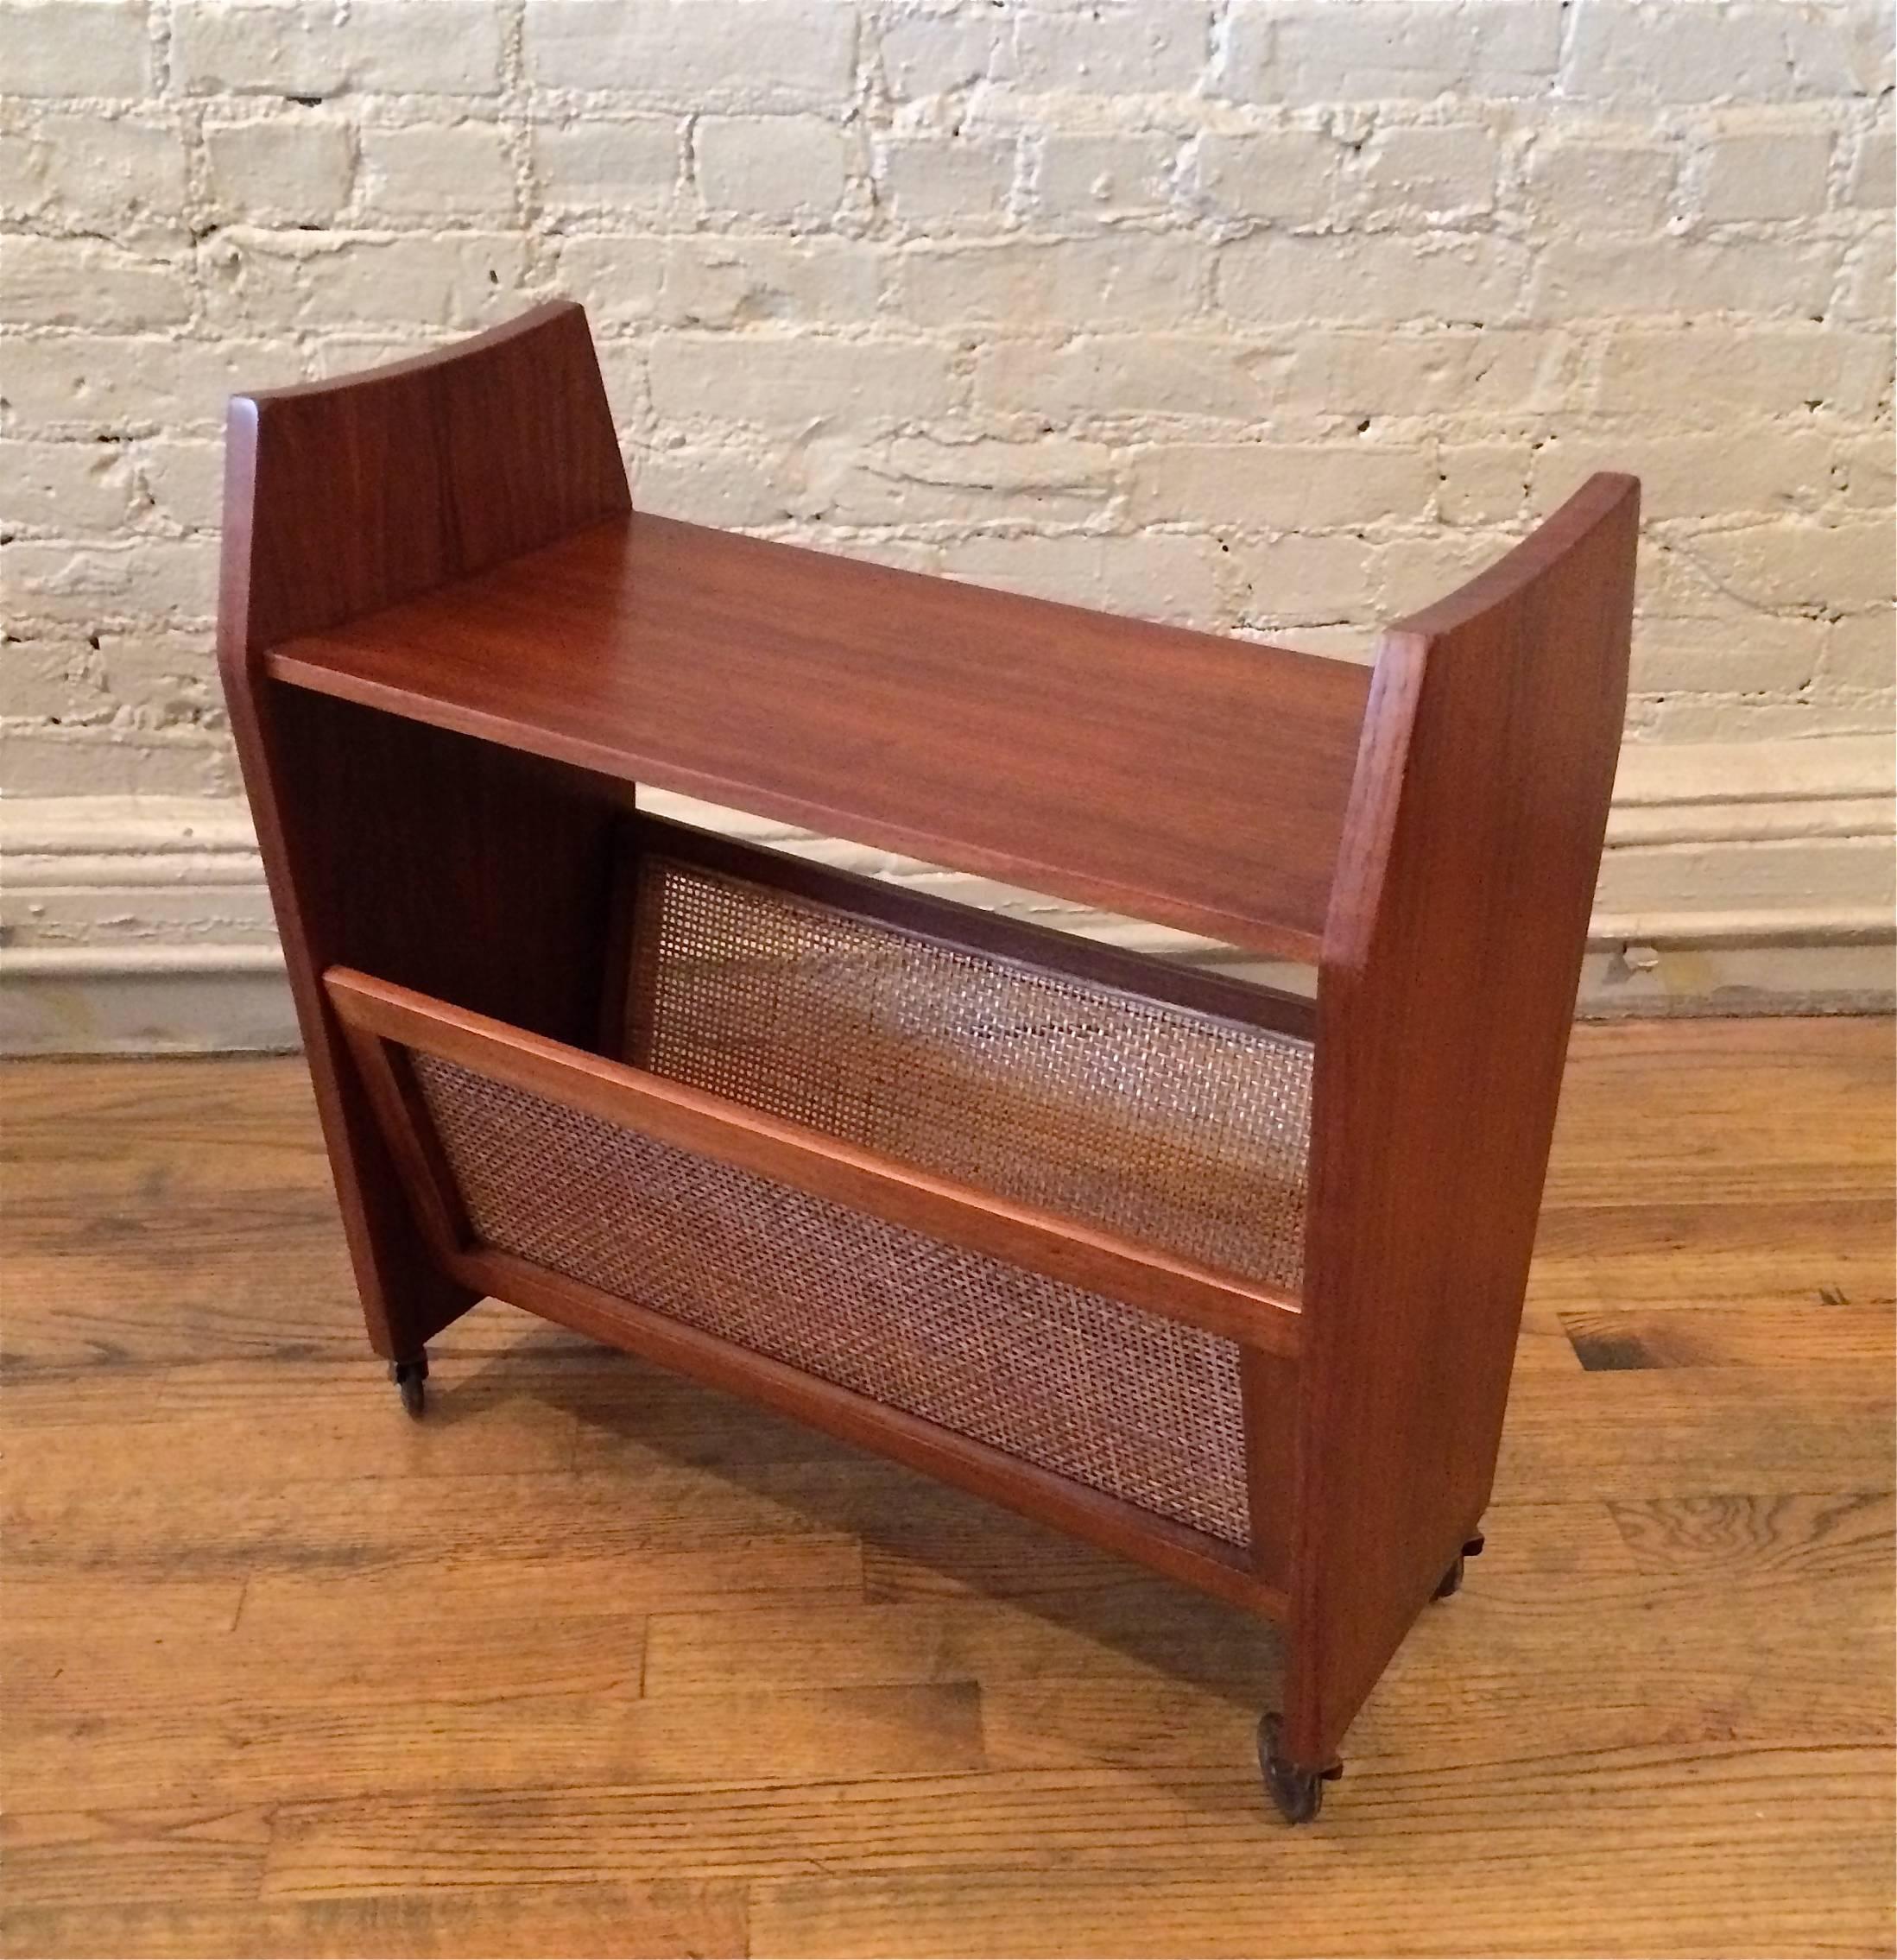 Danish modern, rolling, teak, magazine rack side table with caned sides.